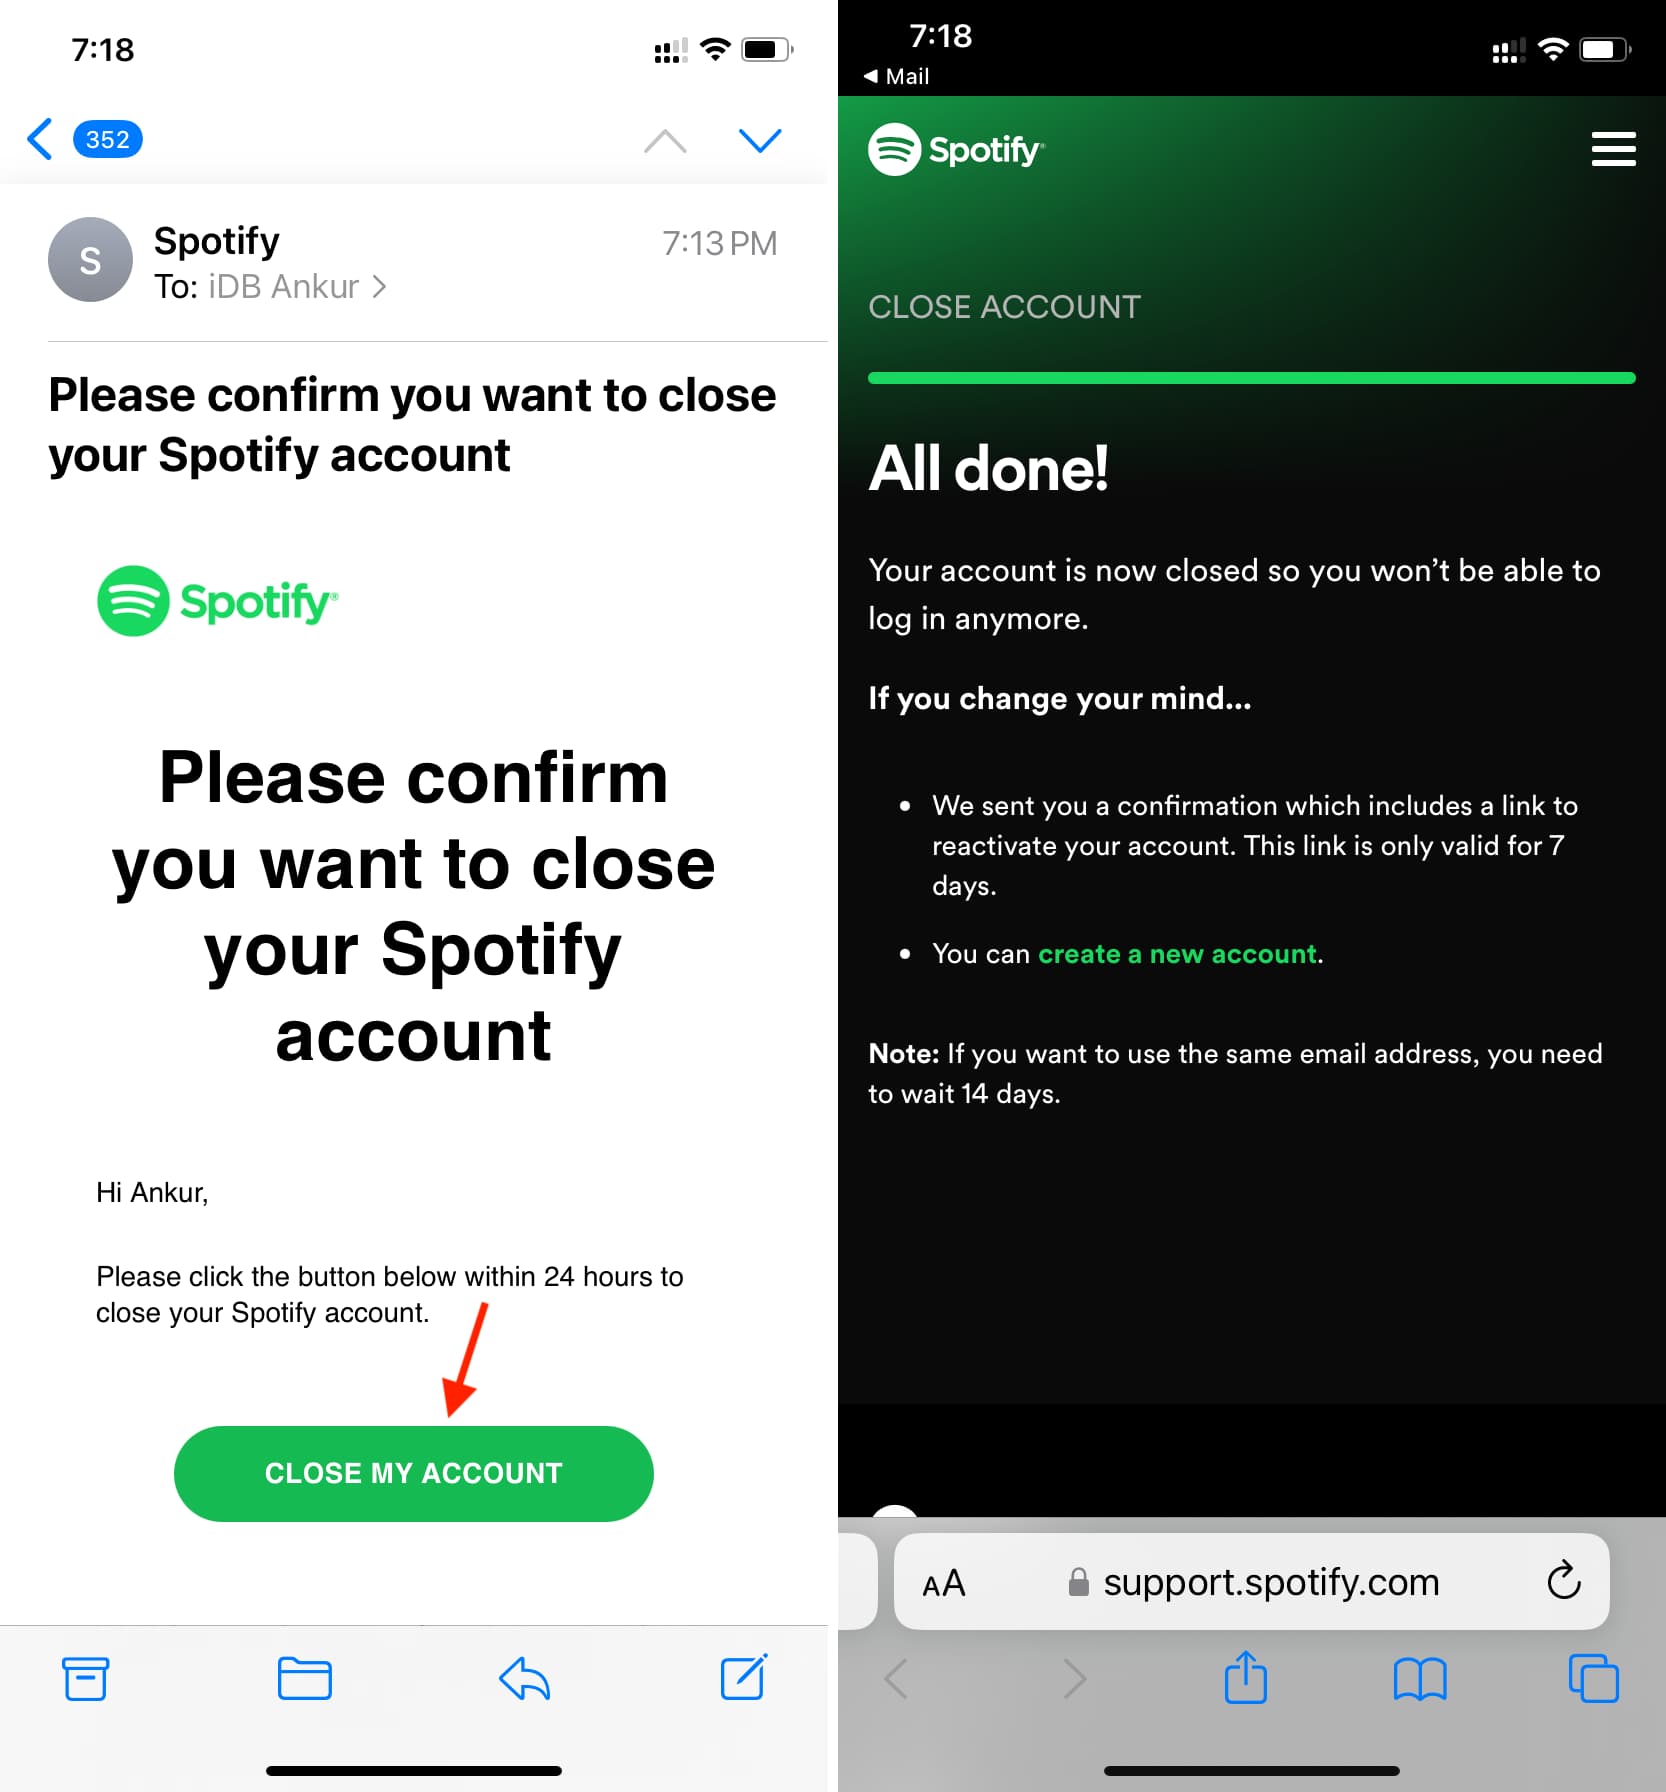 Please confirm you want to close your Spotify account